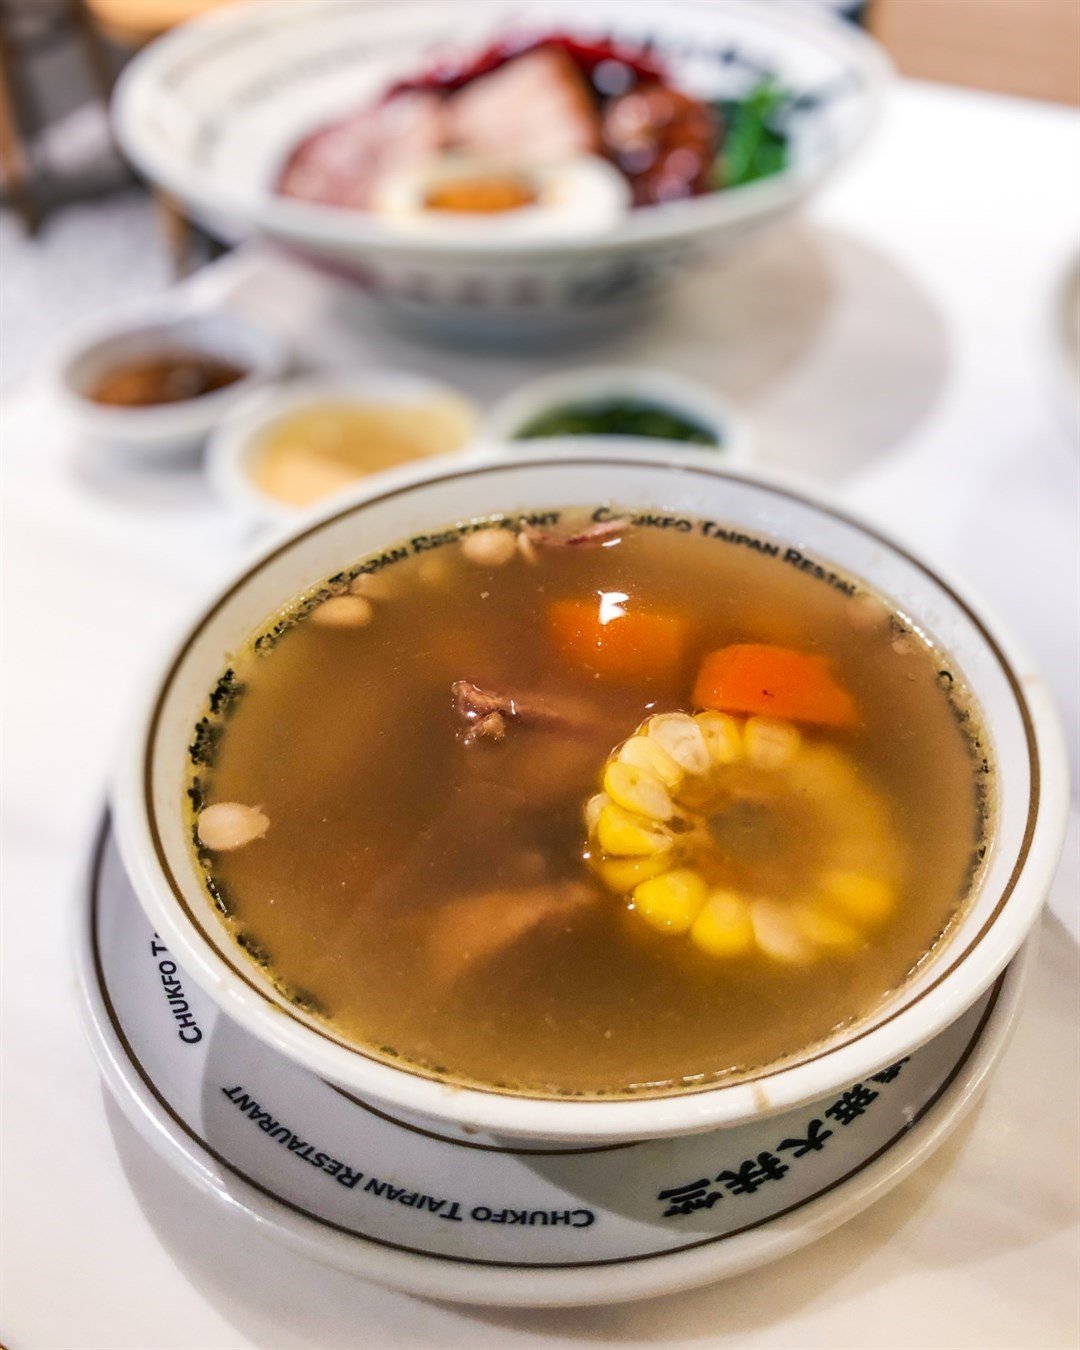  "Old Fire Soup" (老火湯) - With Carrot, Corn, and Pork Bone